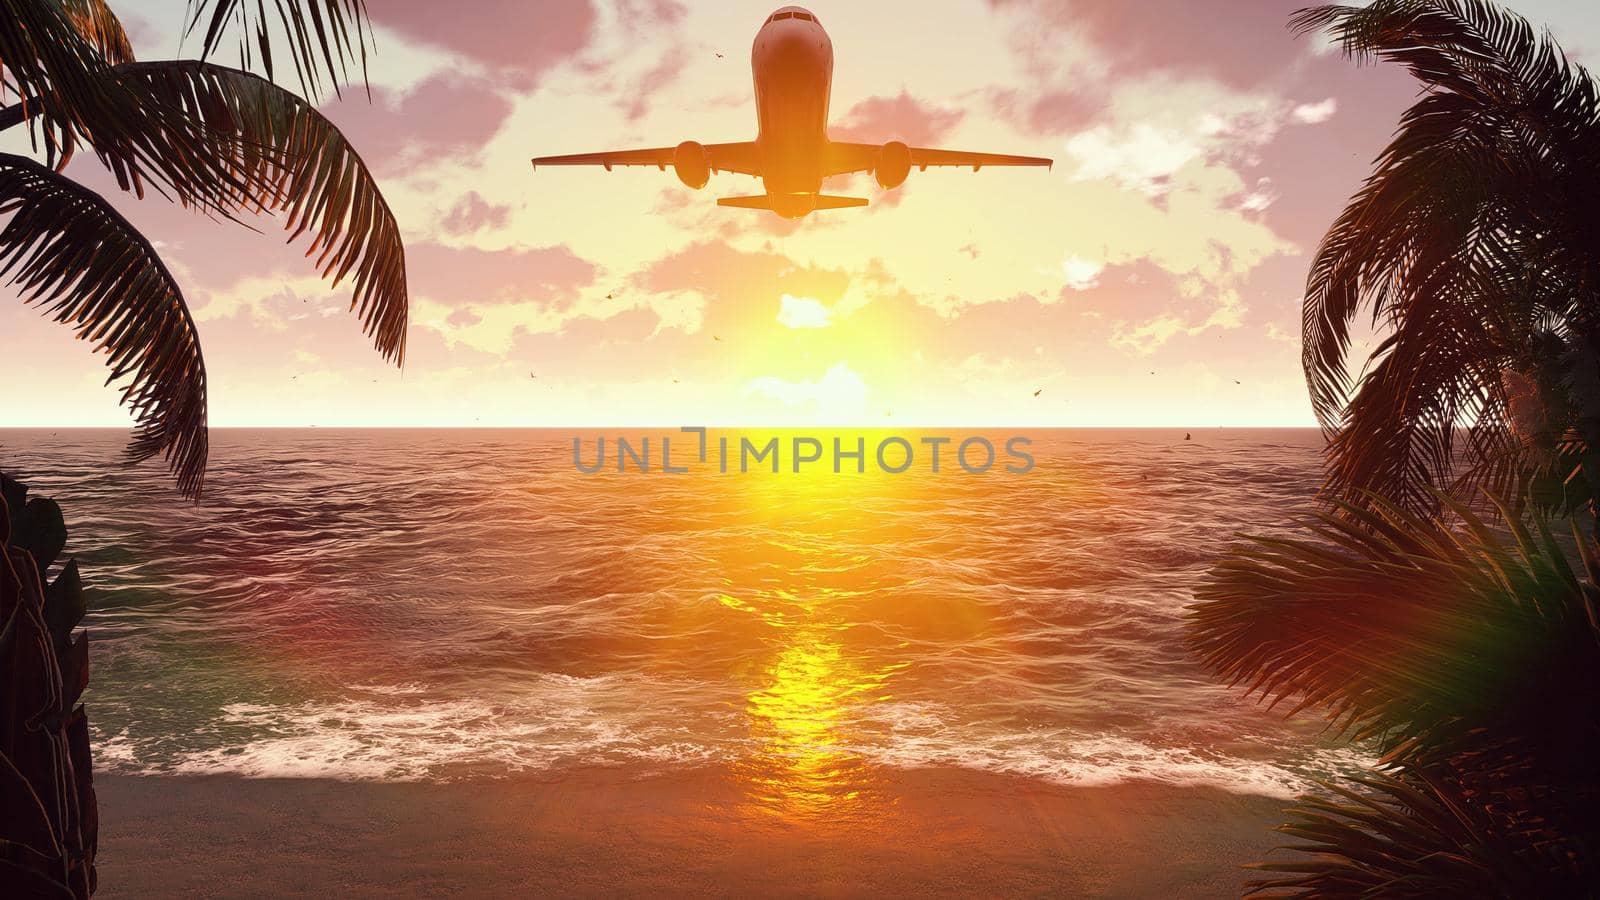 The plane flies over a tropical island on the background of a beautiful sunset